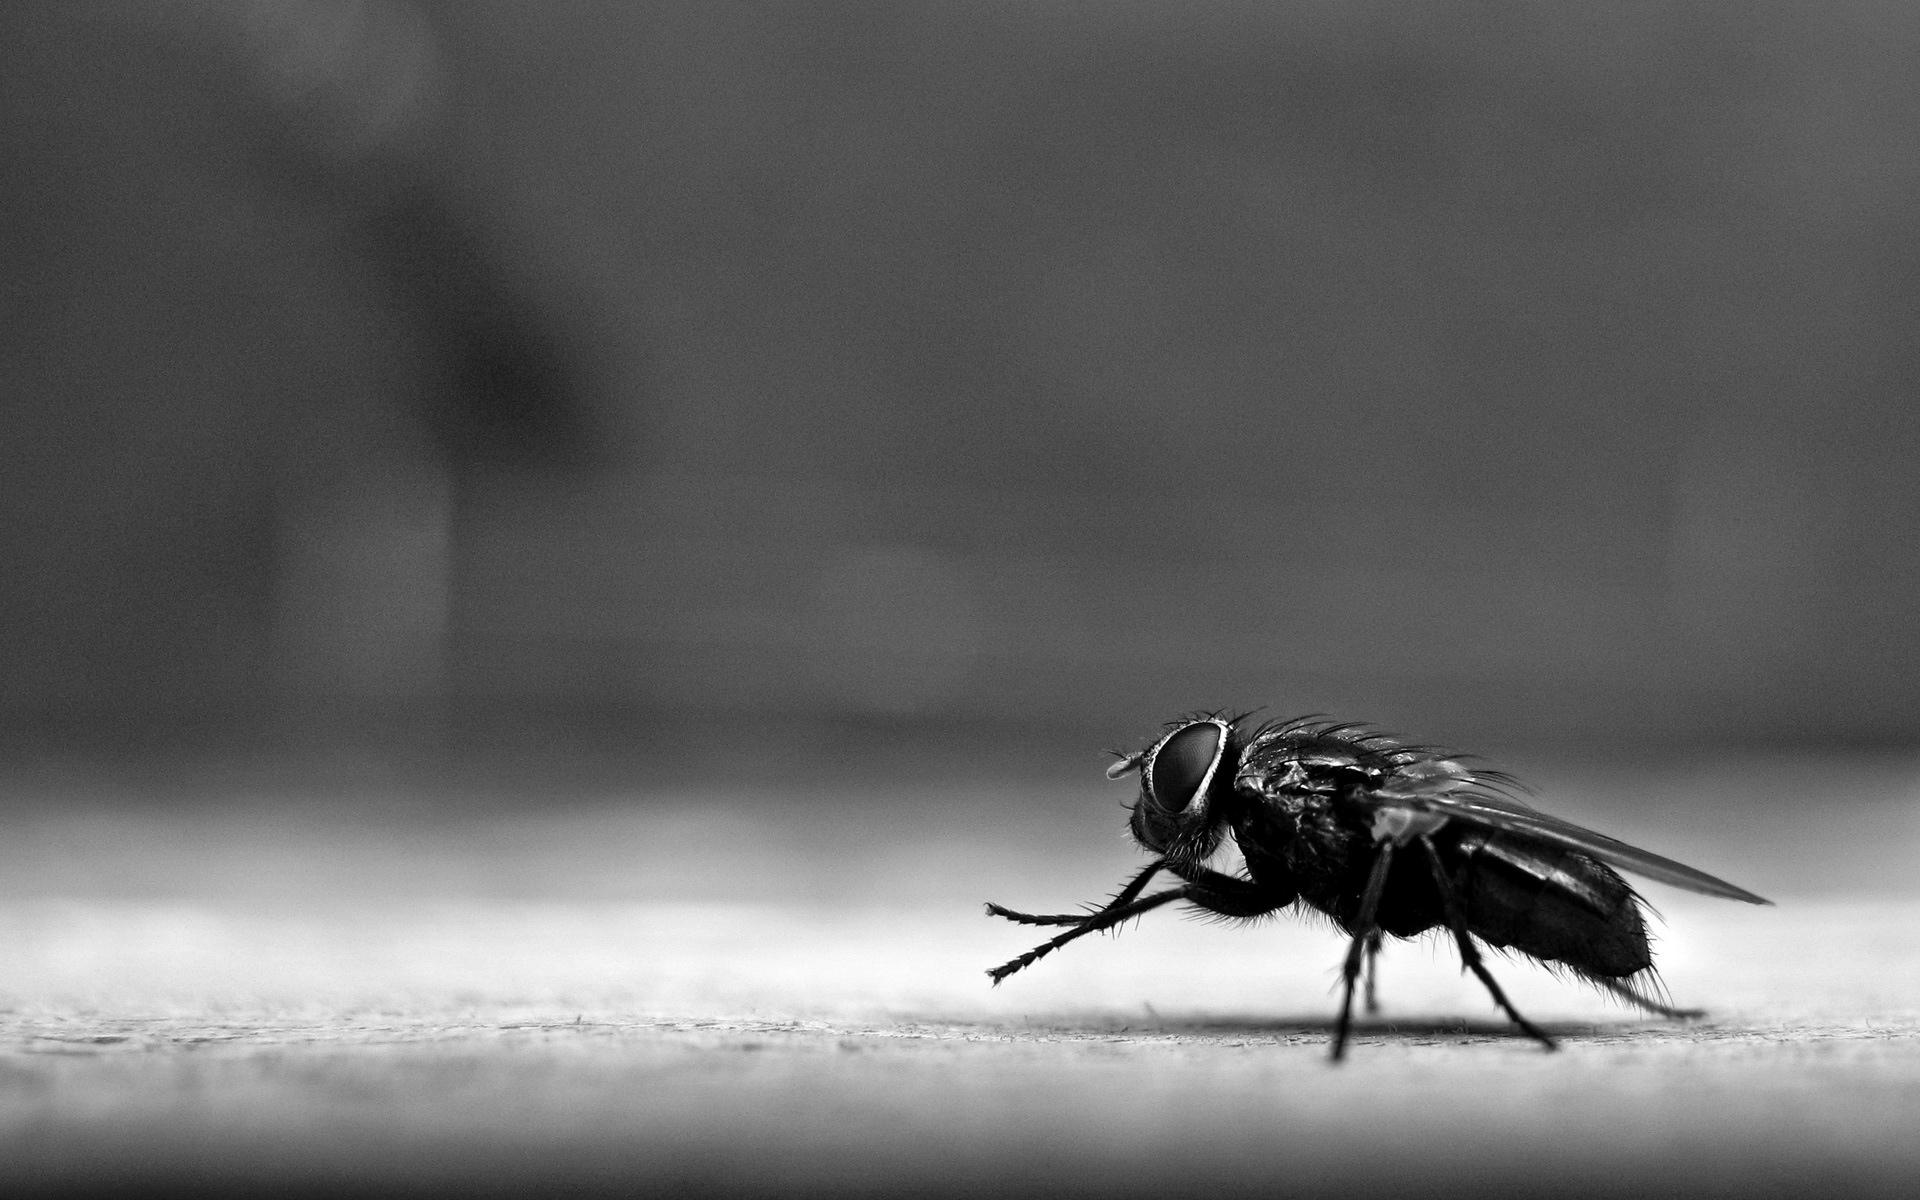 Fly Full Hd Wallpaper And Background Image 1920x1200 HD Wallpapers Download Free Map Images Wallpaper [wallpaper684.blogspot.com]